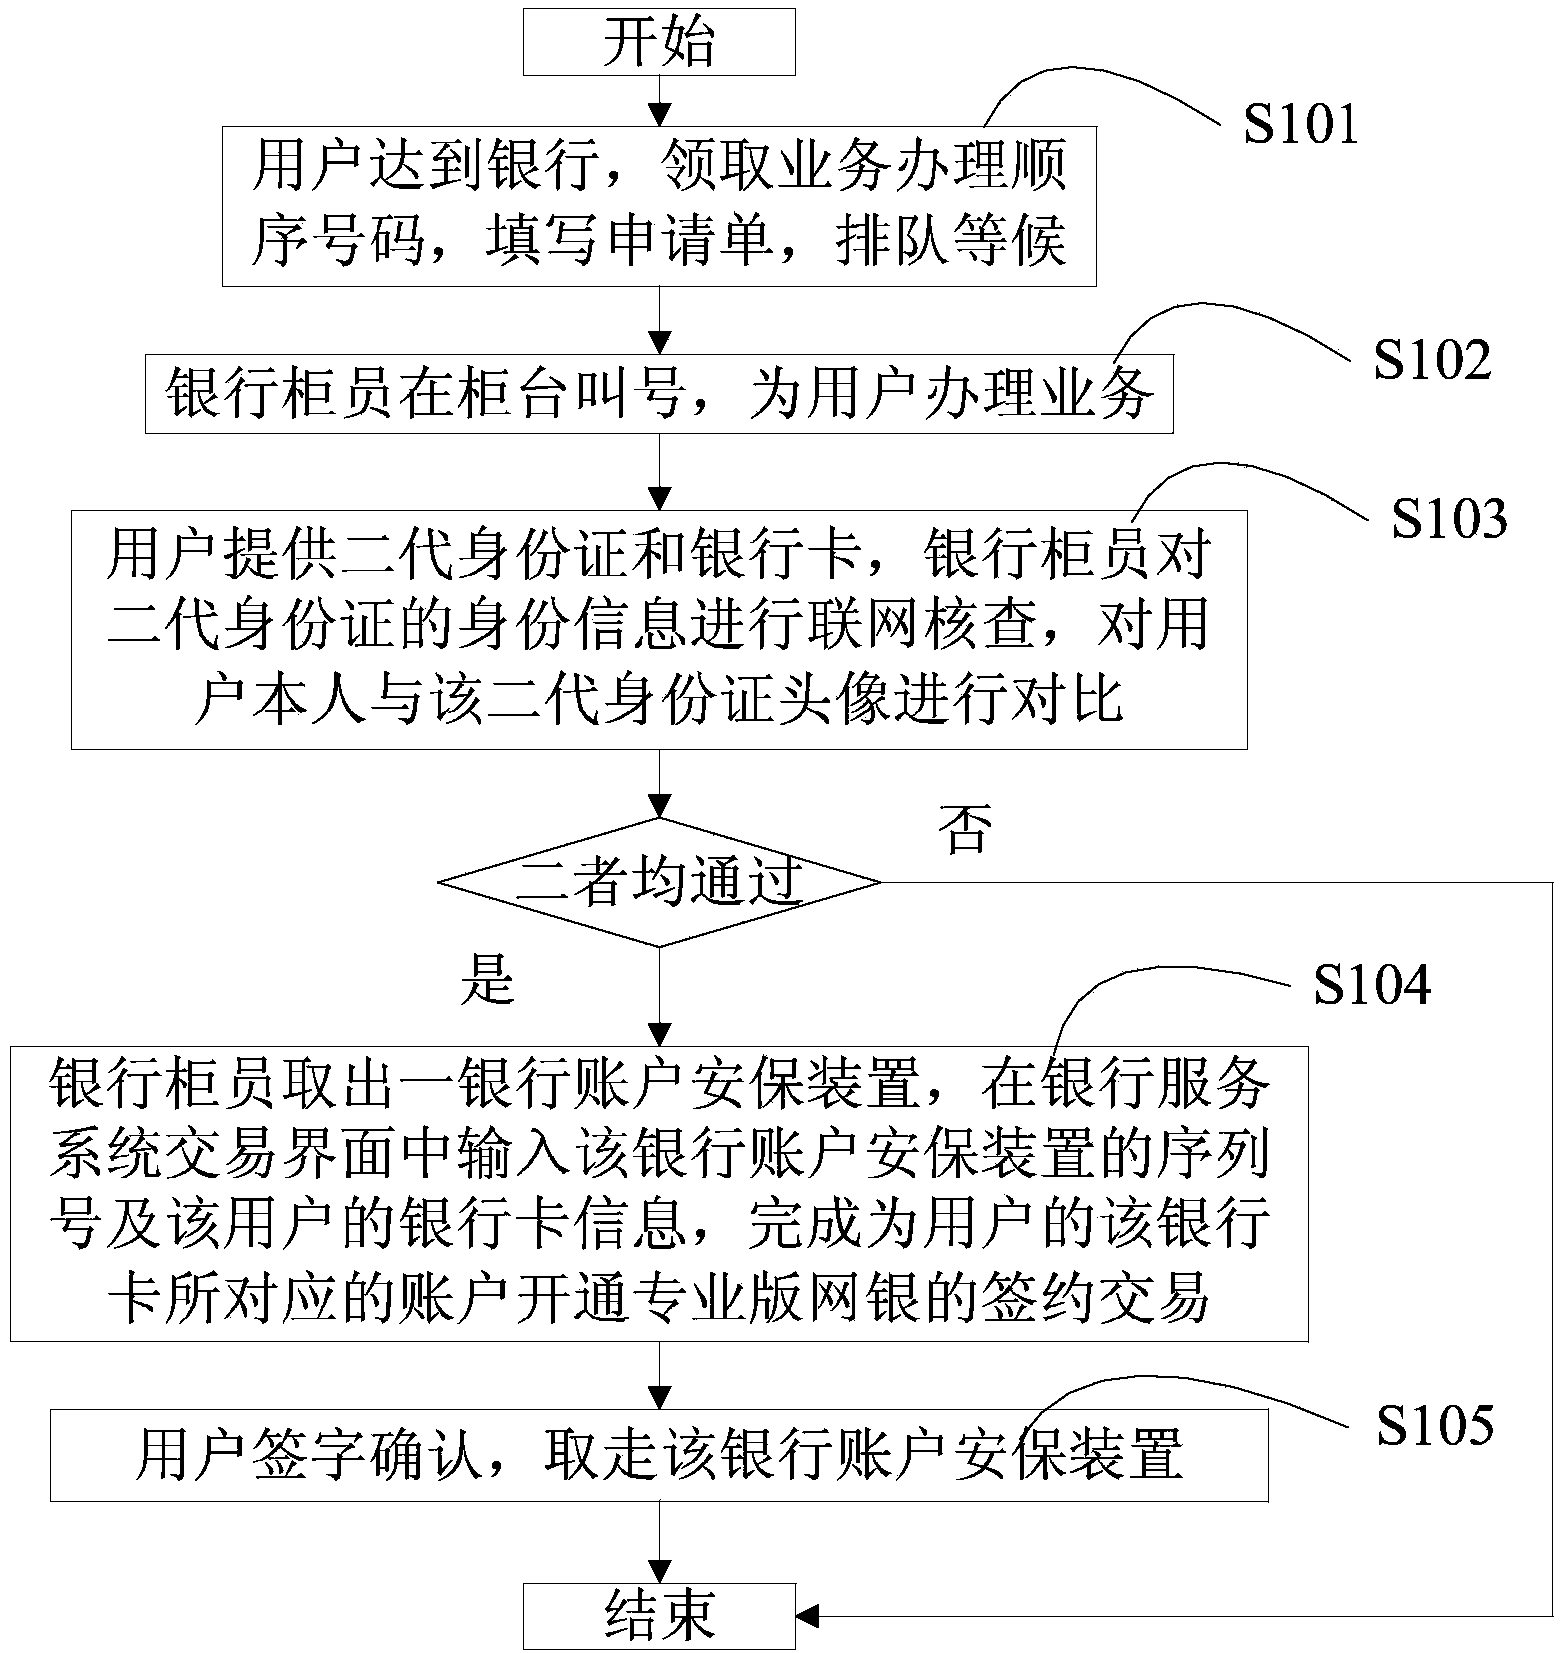 Bank account security device self-service issuing device and method